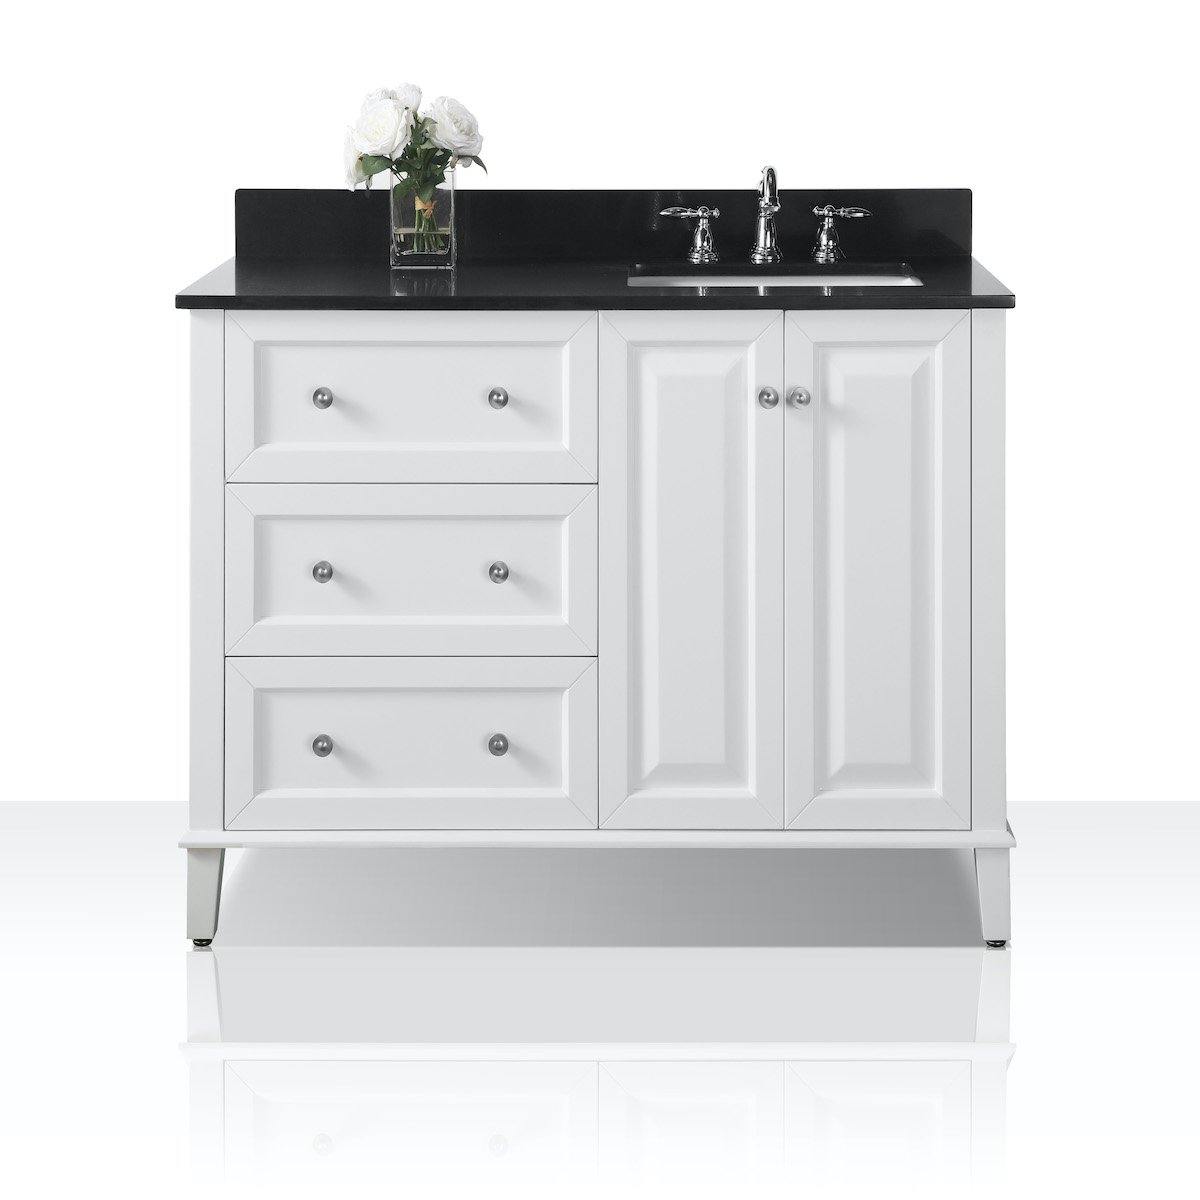 Ancerre Designs Hannah 48 Inch White Single Vanity with Right Basin and Nickel Hardware